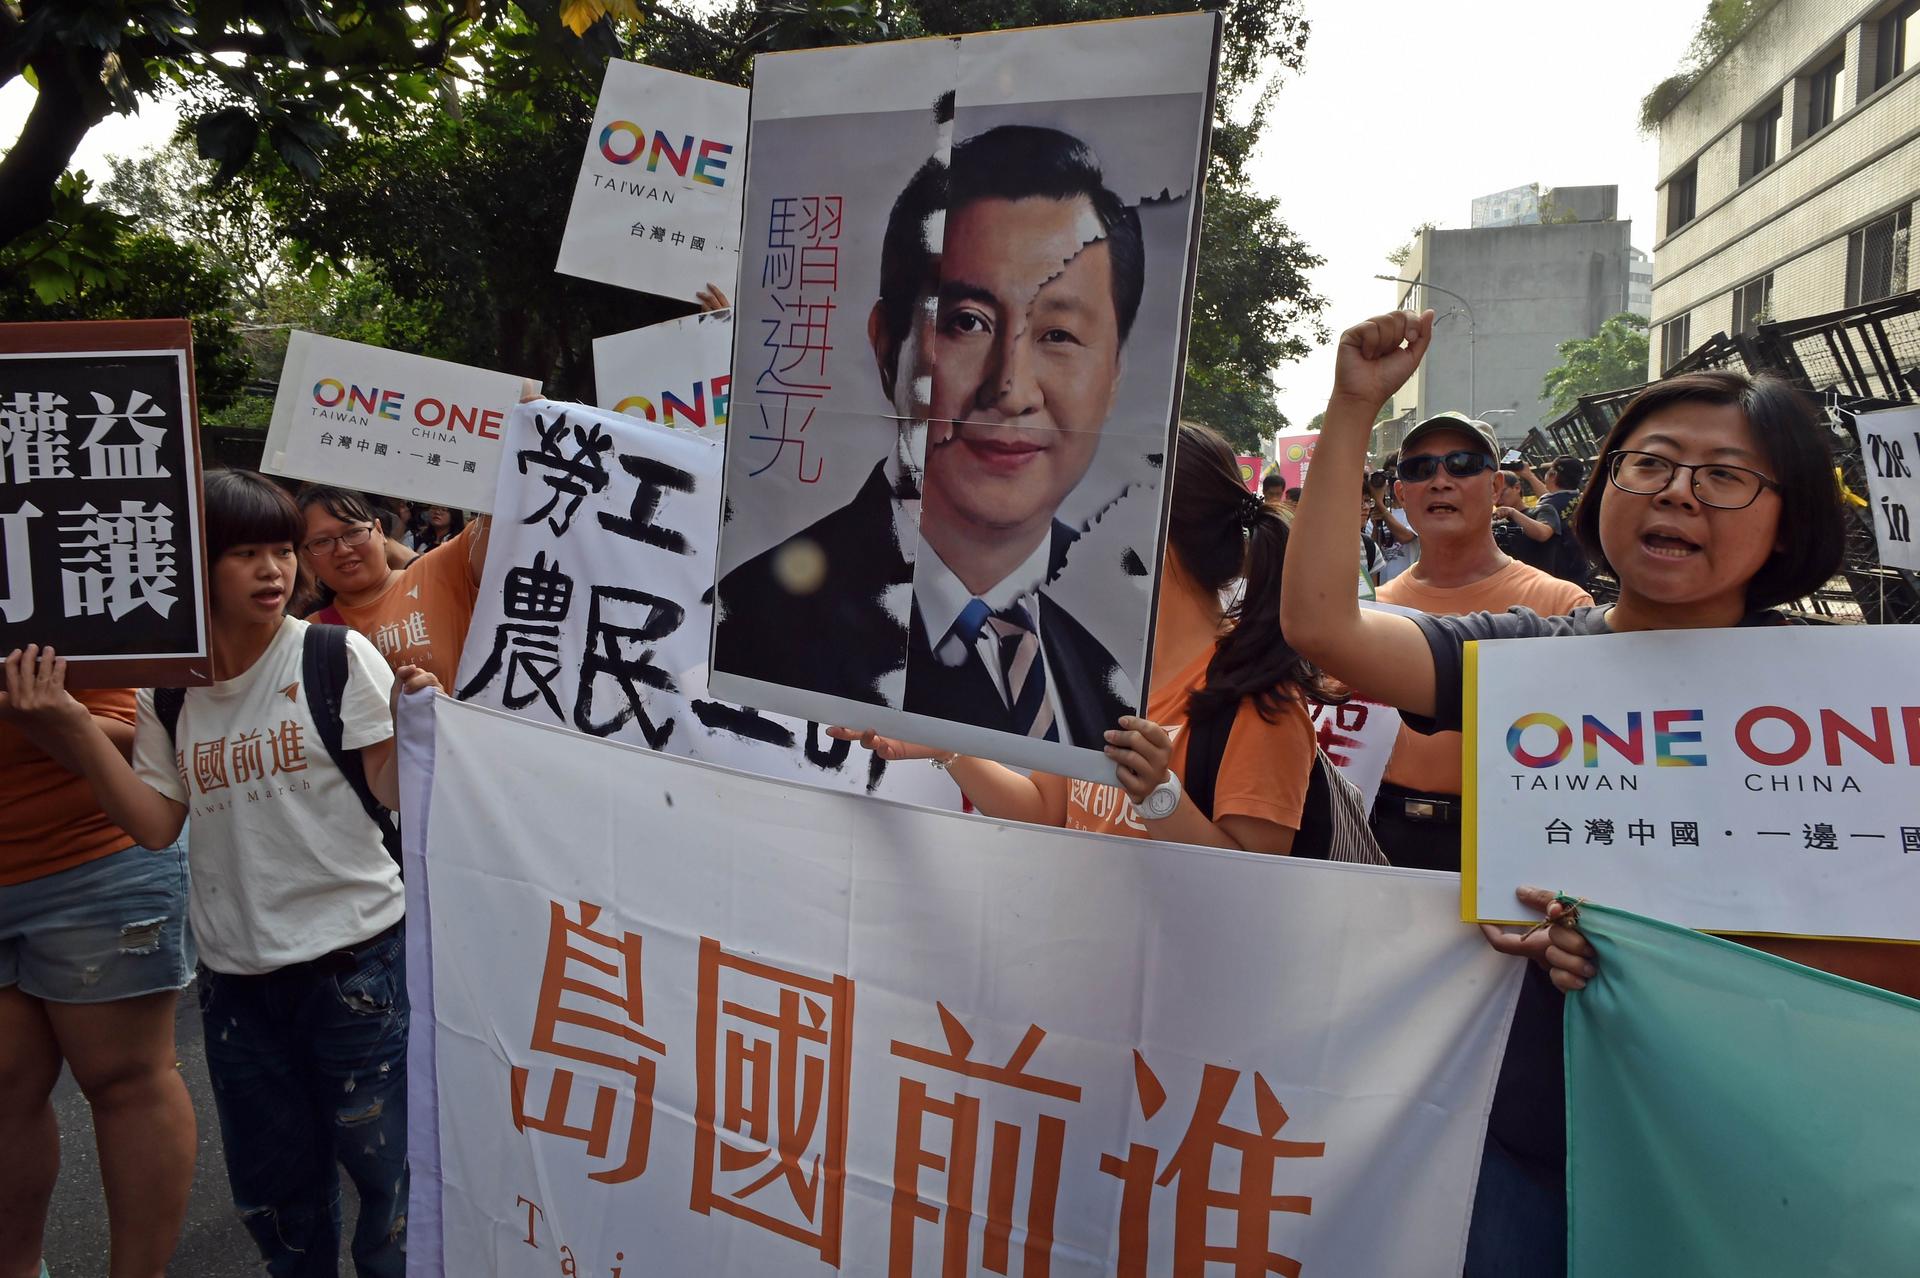 Taiwanese protesters chant slogans as they hold up banners and posters in Taipei yesterday. Photo: AFP